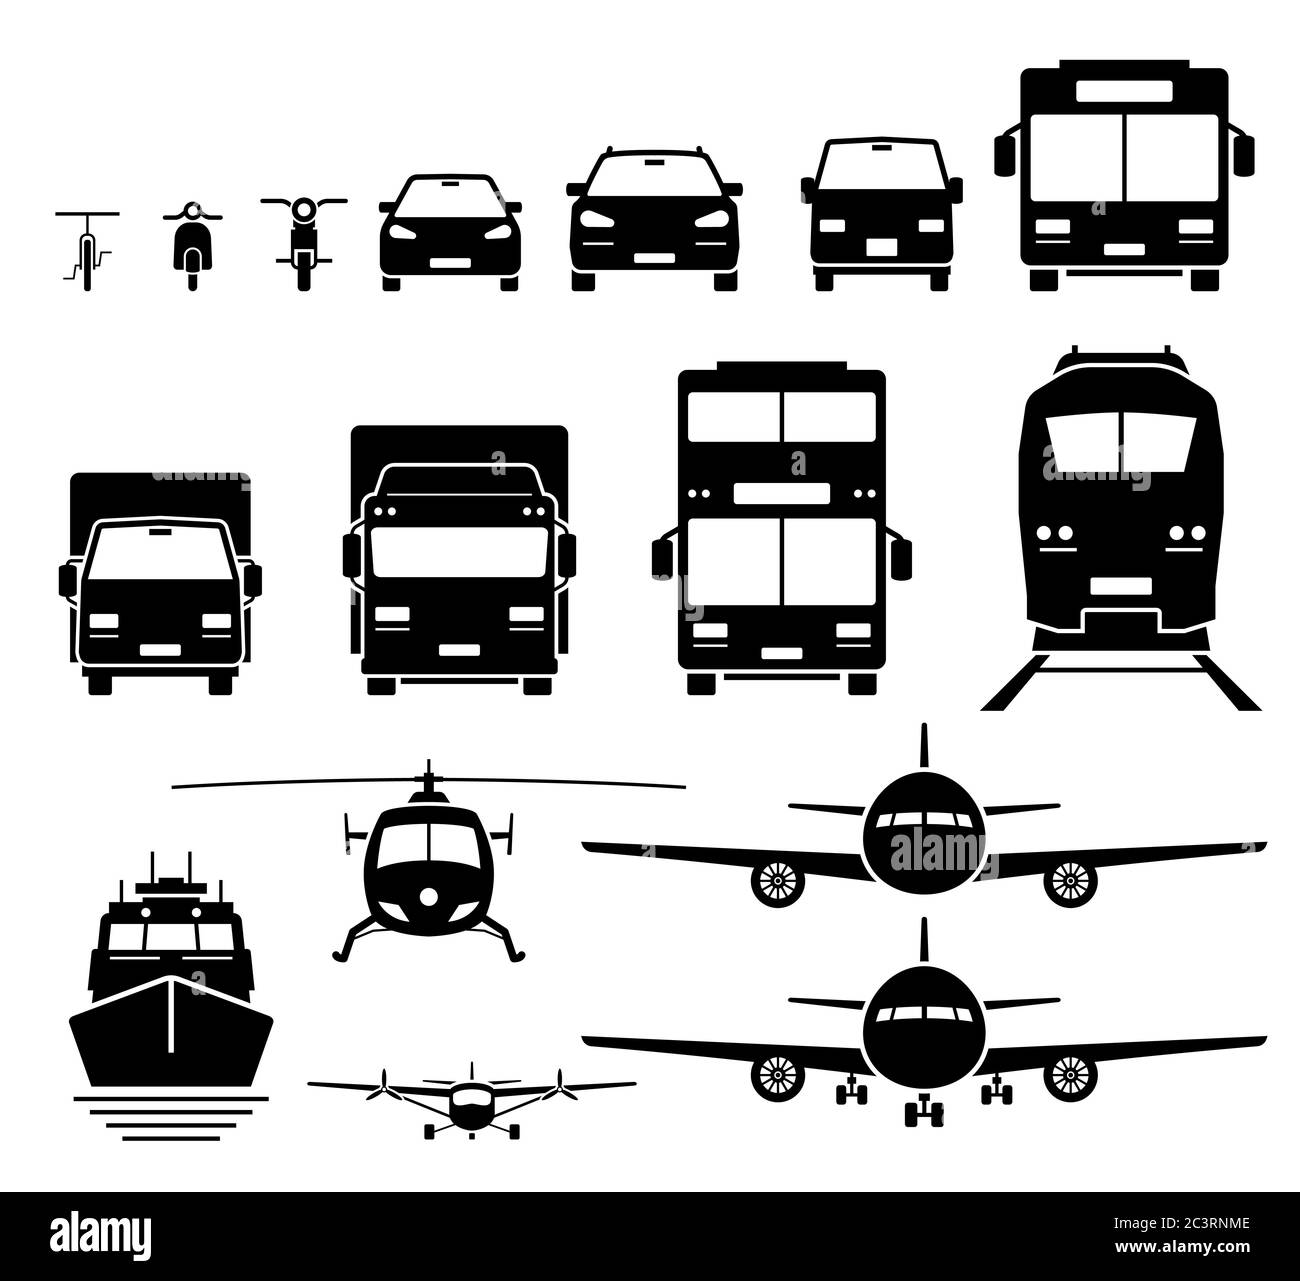 Front view of ground, air, and water transportation vehicles icons set. Vector of bicycle, motorcycle, car, SUV, van, bus, lorry, truck, double decker Stock Vector